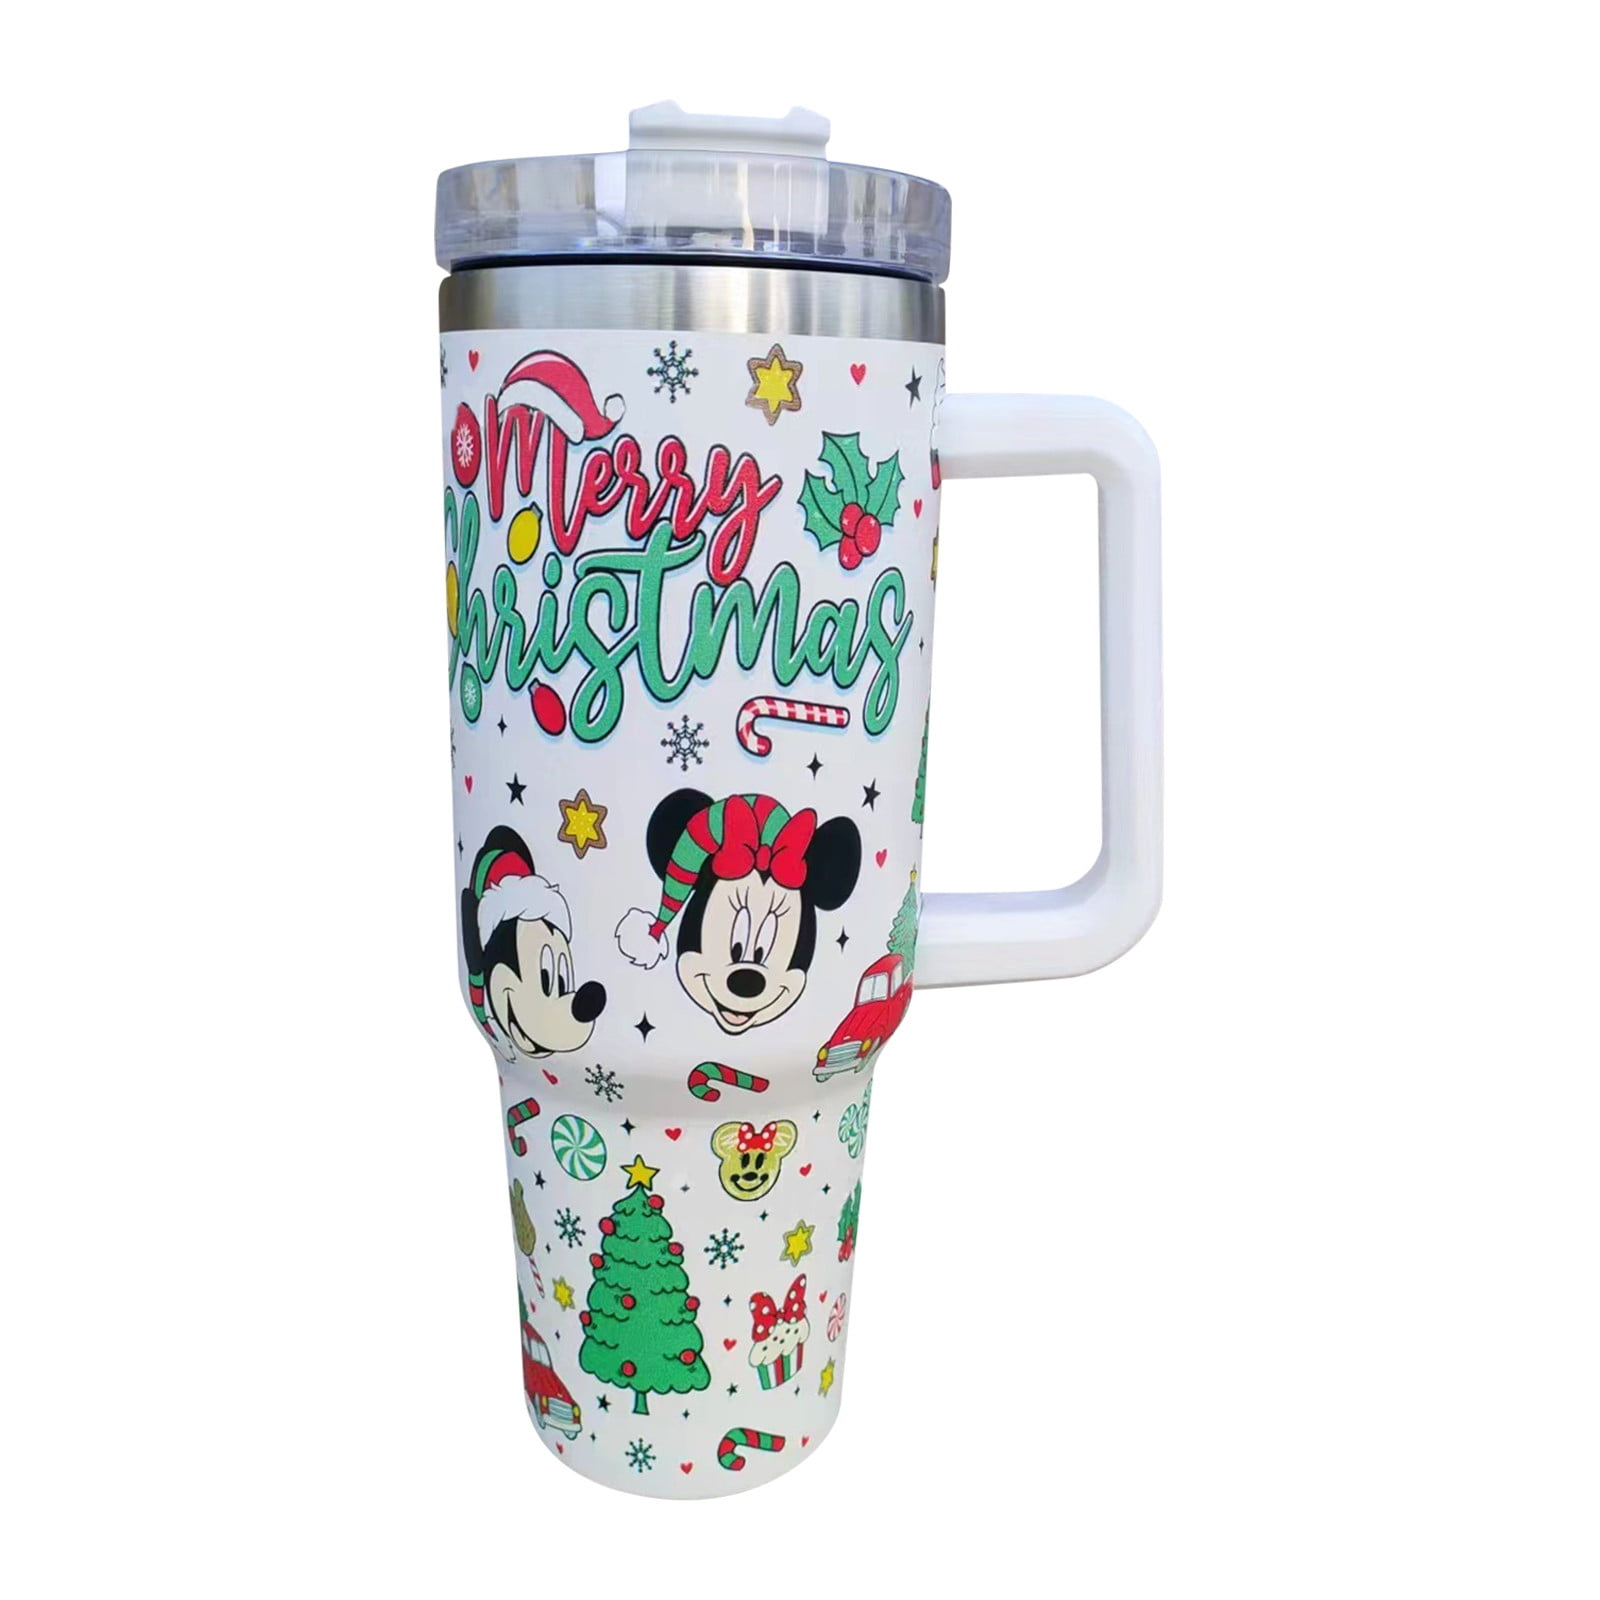  Im Done Adulting Im Going to Disney Insulated Stainless Steel  Tumbler with Lid, Set of two Disney-Inspired Hot/Cold Mugs, Mickey-Minnie